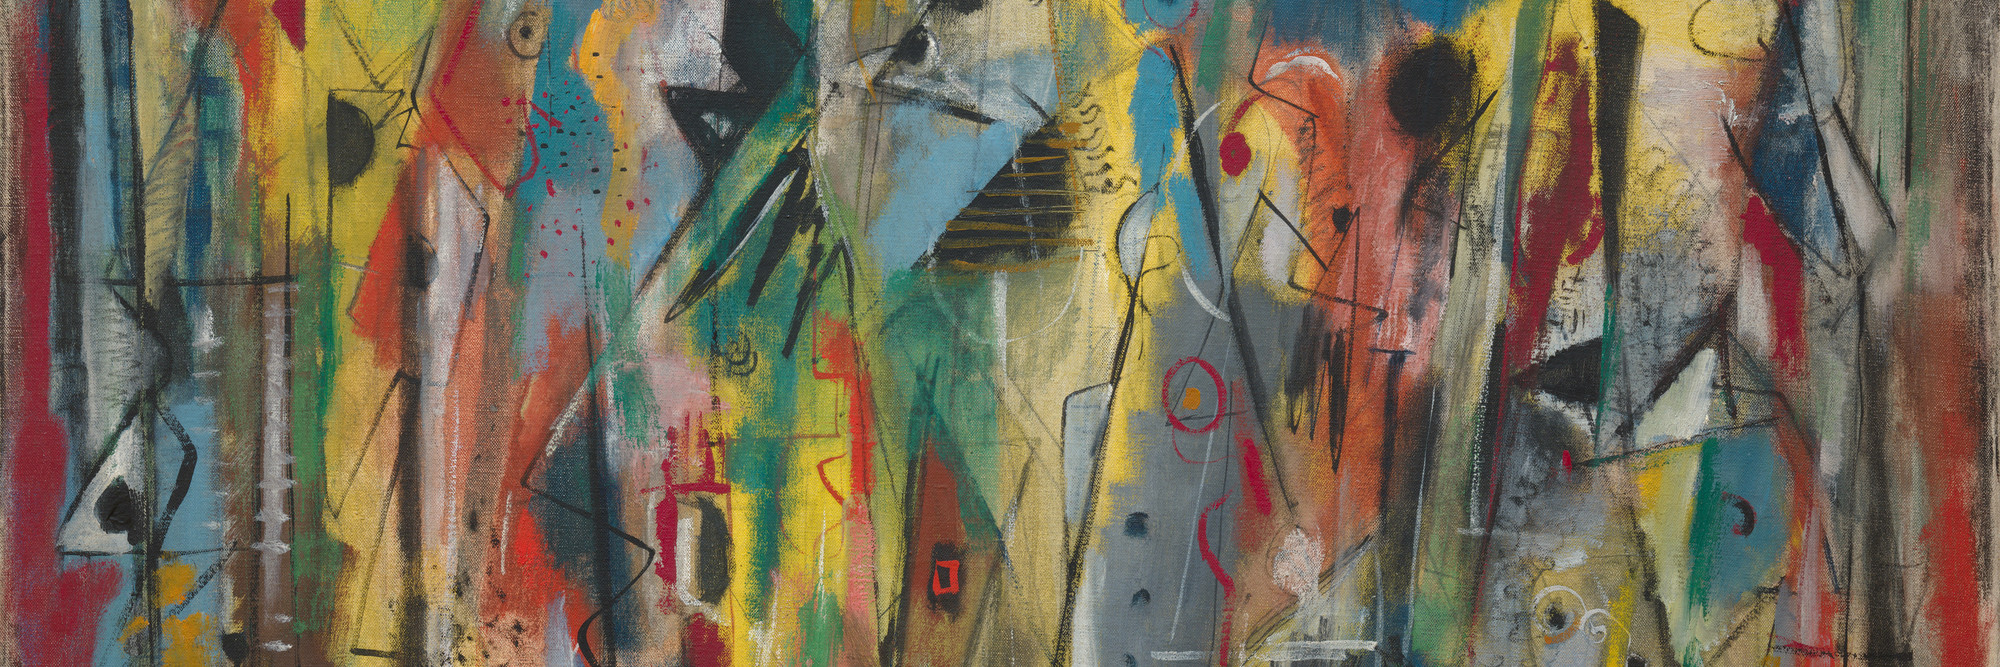 Norman Lewis, Phantasy II, 1946. Oil on canvas, 28 1/8 x 35 7/8&#34; (71.4 x 91.2 cm). Gift of The Friends of Education of The Museum of Modern Art. Photo: John Wronn